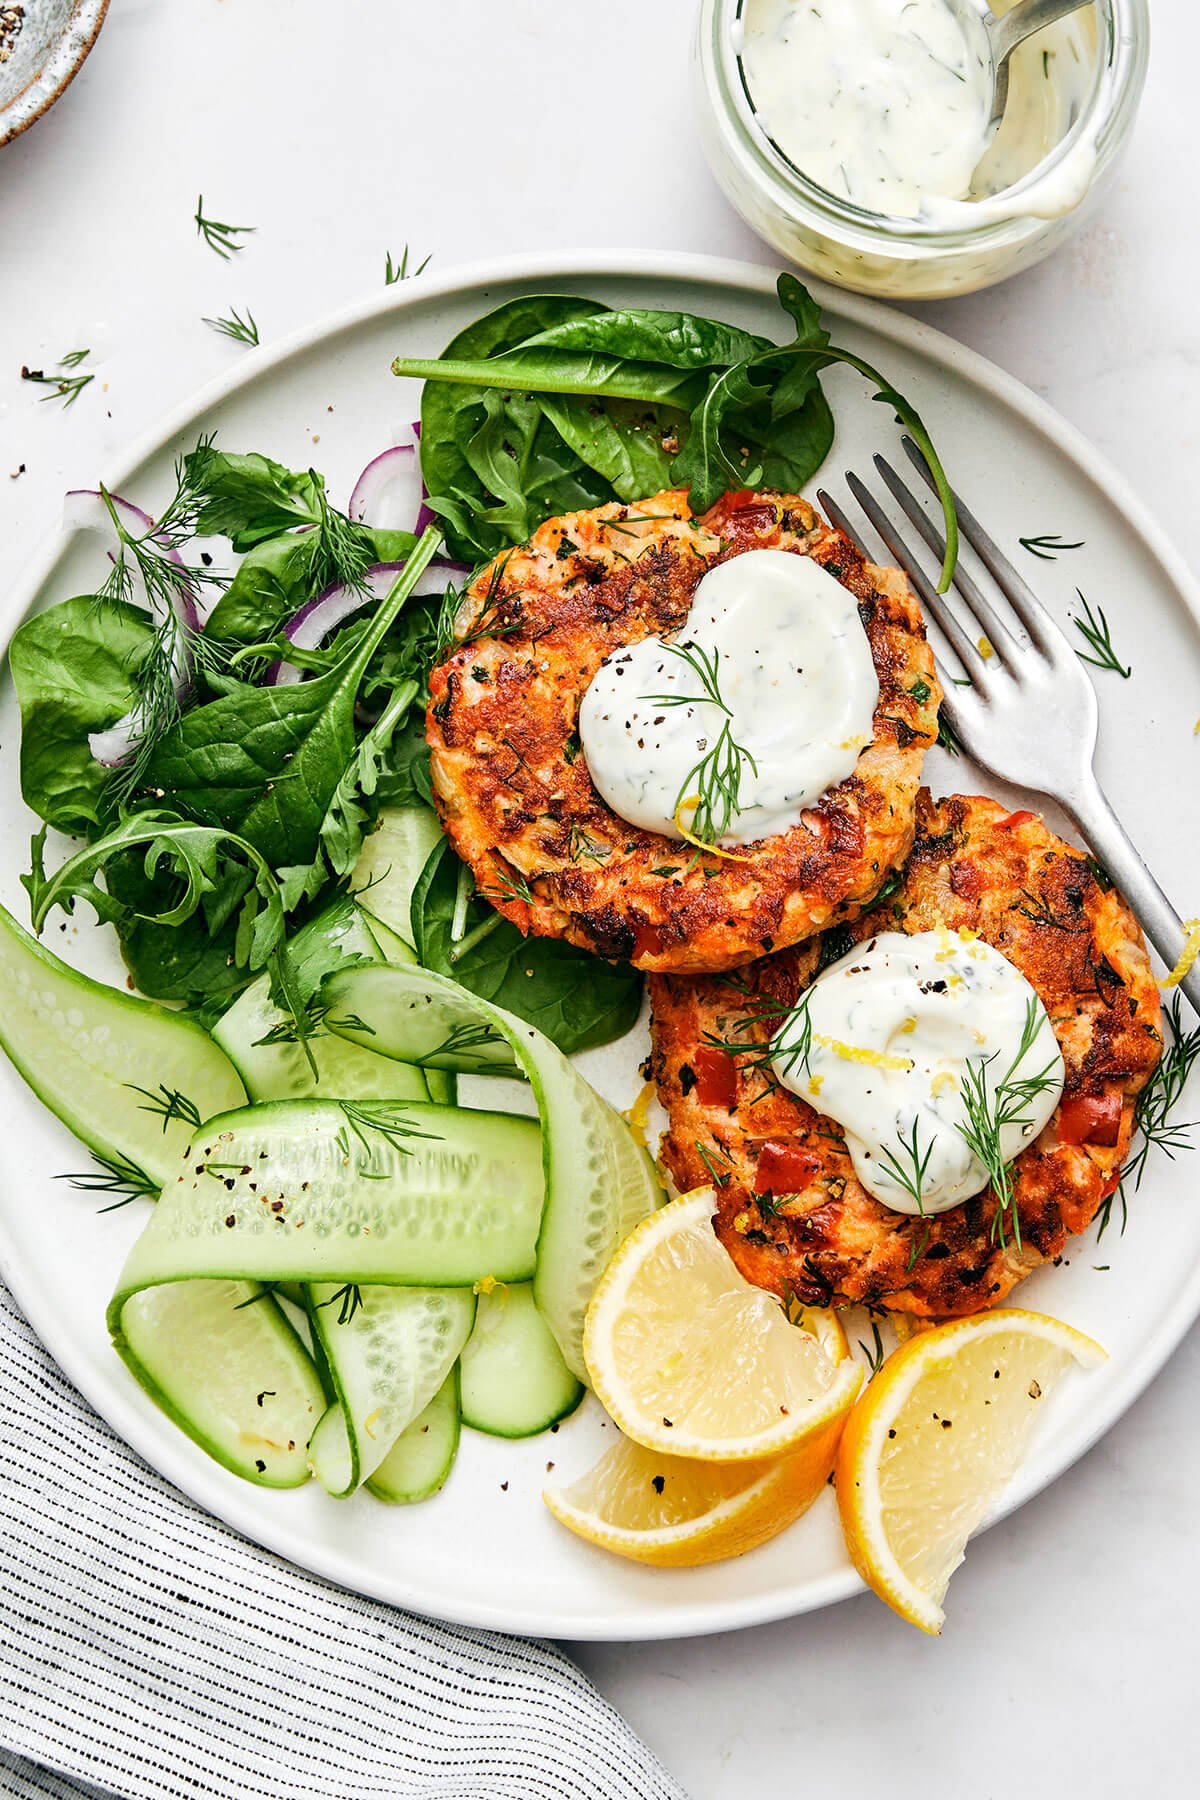 Salmon patties with a side salad on a plate.